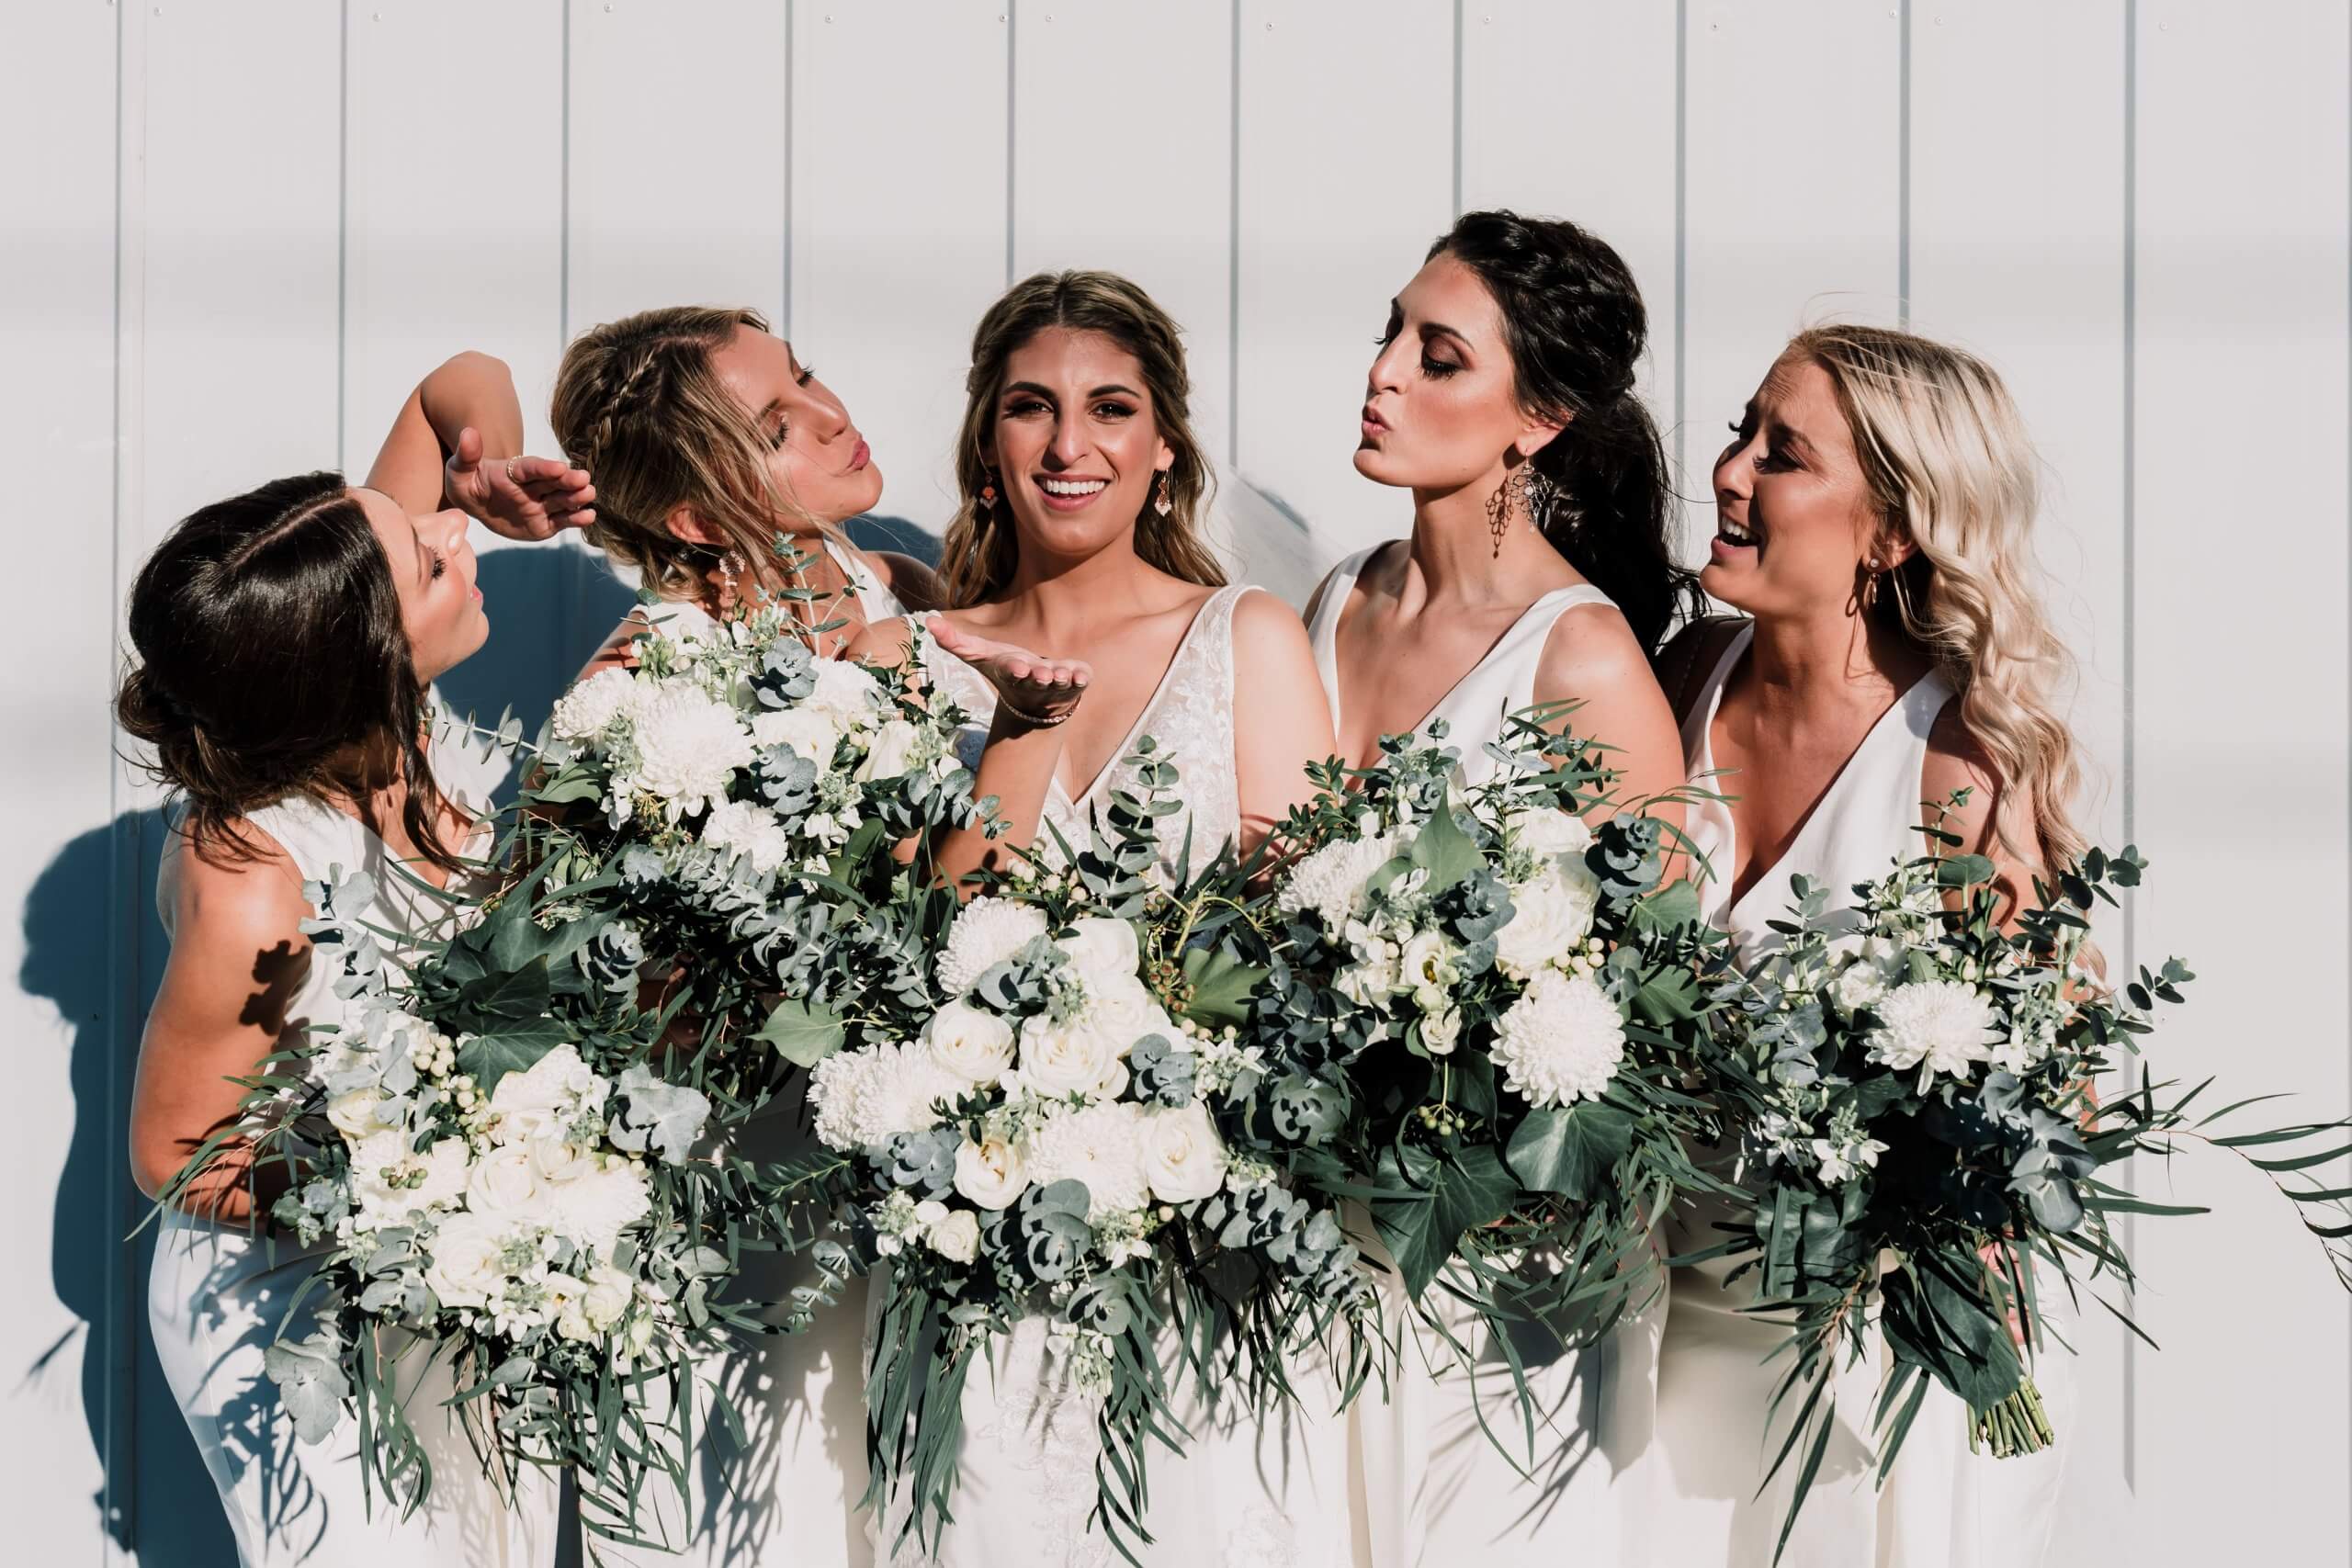 The beautiful bride in the middle and her four bridesmaids holding beautiful blooming white flowers are they are photographed during the bridal session.